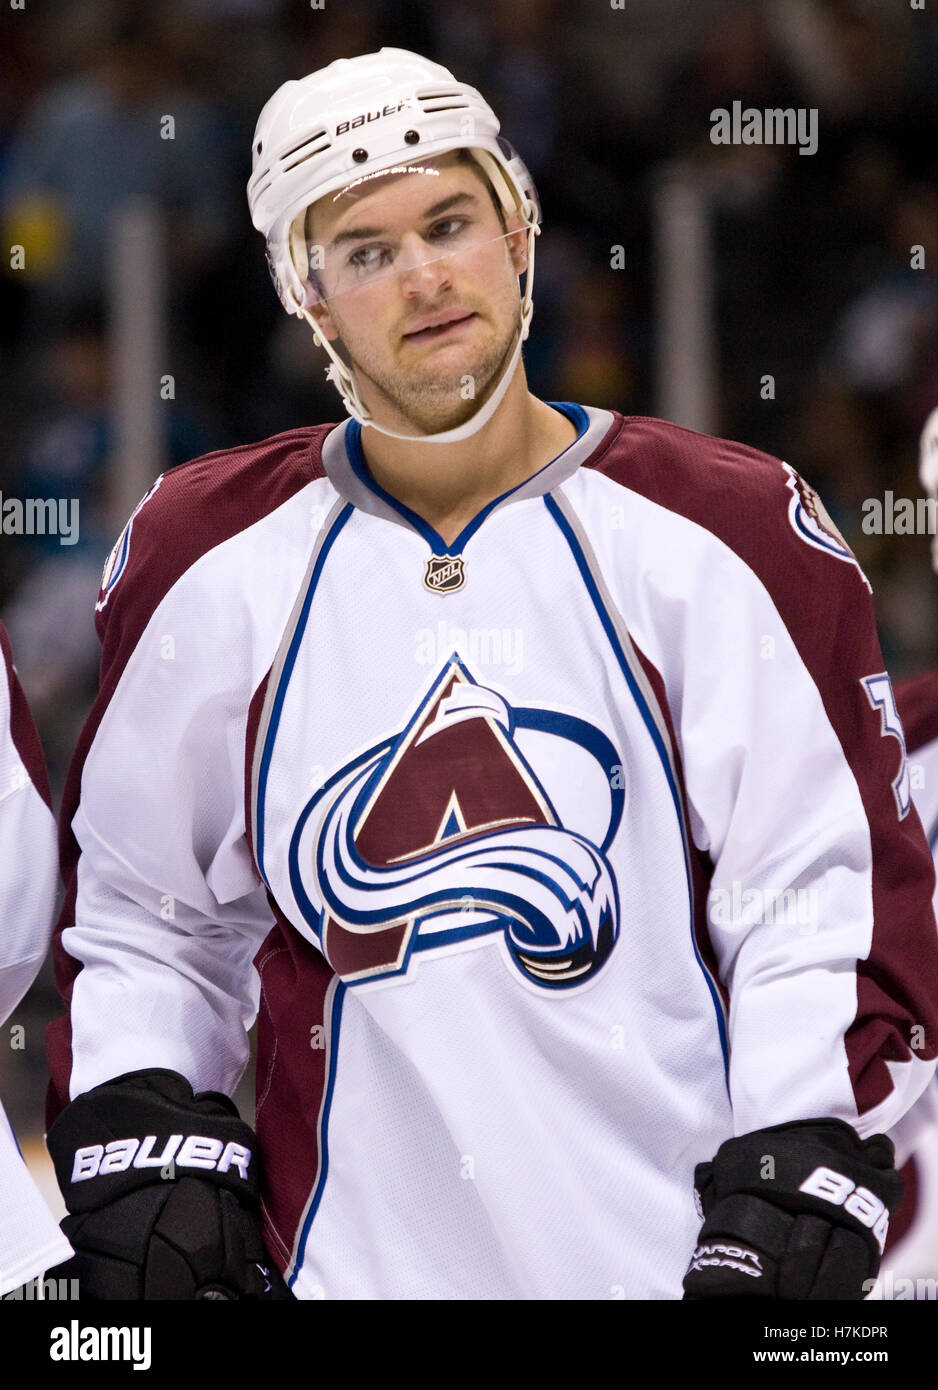 9,841 Ryan Oreilly Photos & High Res Pictures - Getty Images